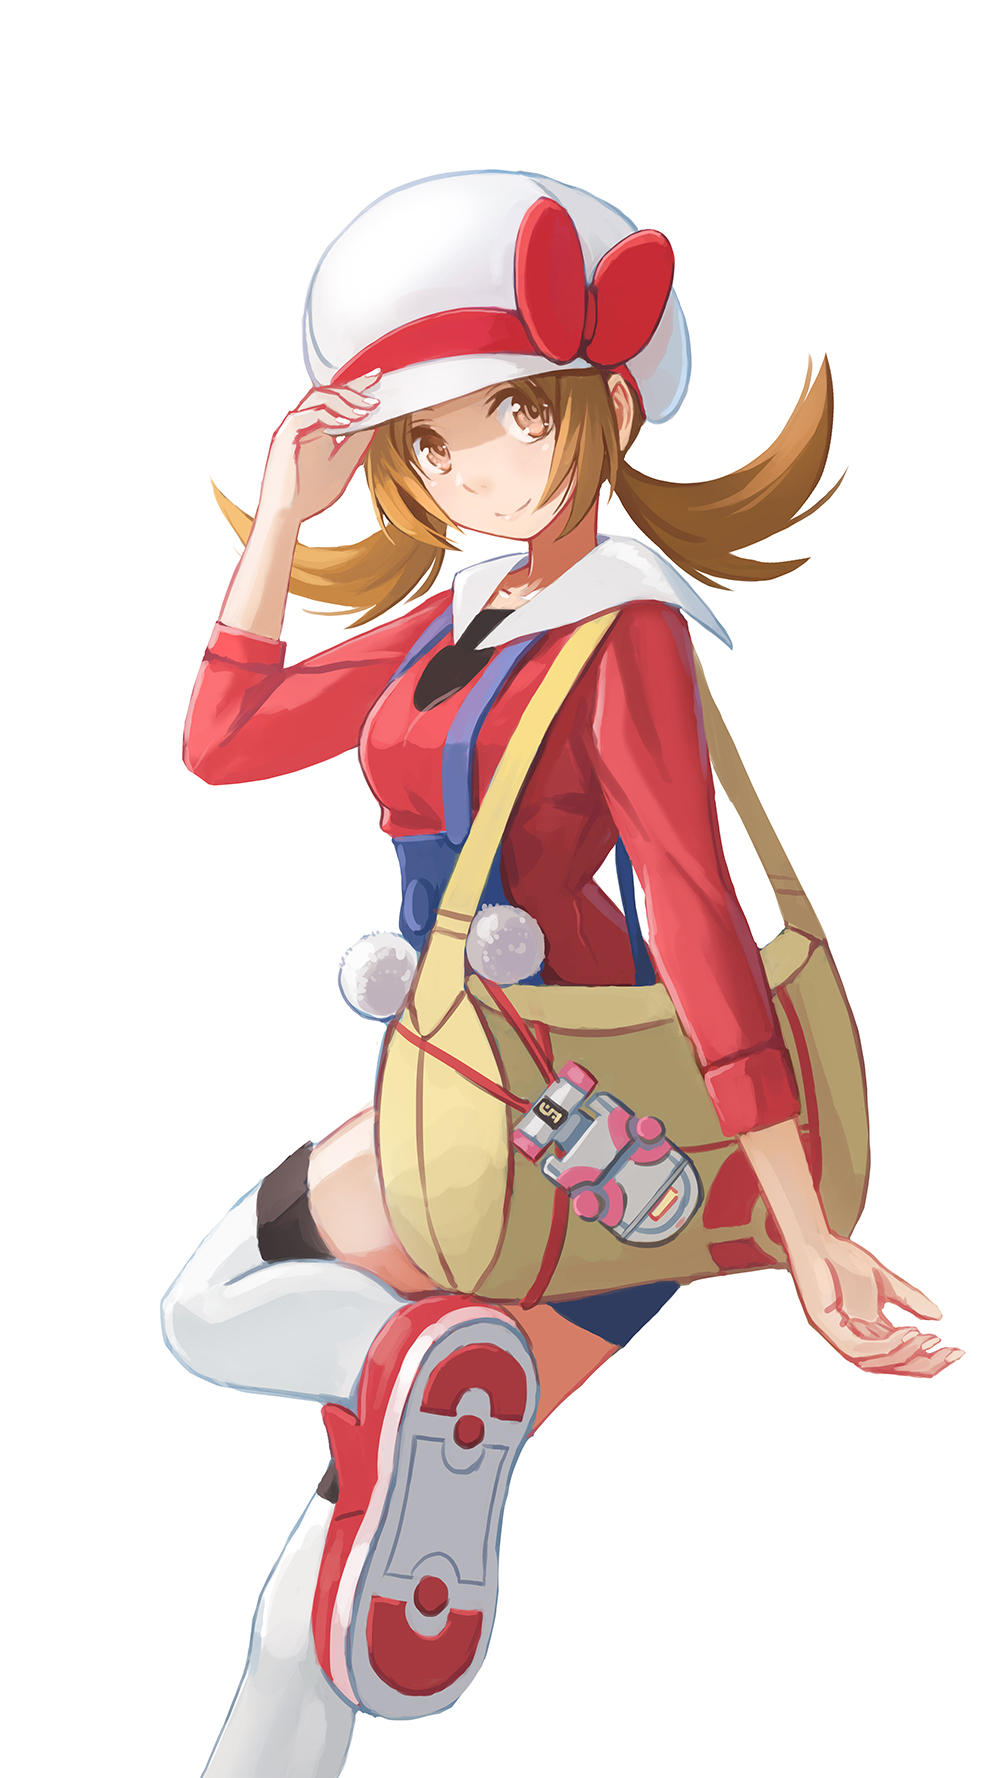 1girl bow brown_eyes brown_hair floating_hair hair_bow hat highres kotone_(pokemon) leg_up long_hair looking_at_viewer pokemon pokemon_(game) pokemon_hgss red_bow red_shirt redpoke shirt simple_background smile solo standing standing_on_one_leg suspenders thigh-highs twintails white_background white_hat white_legwear